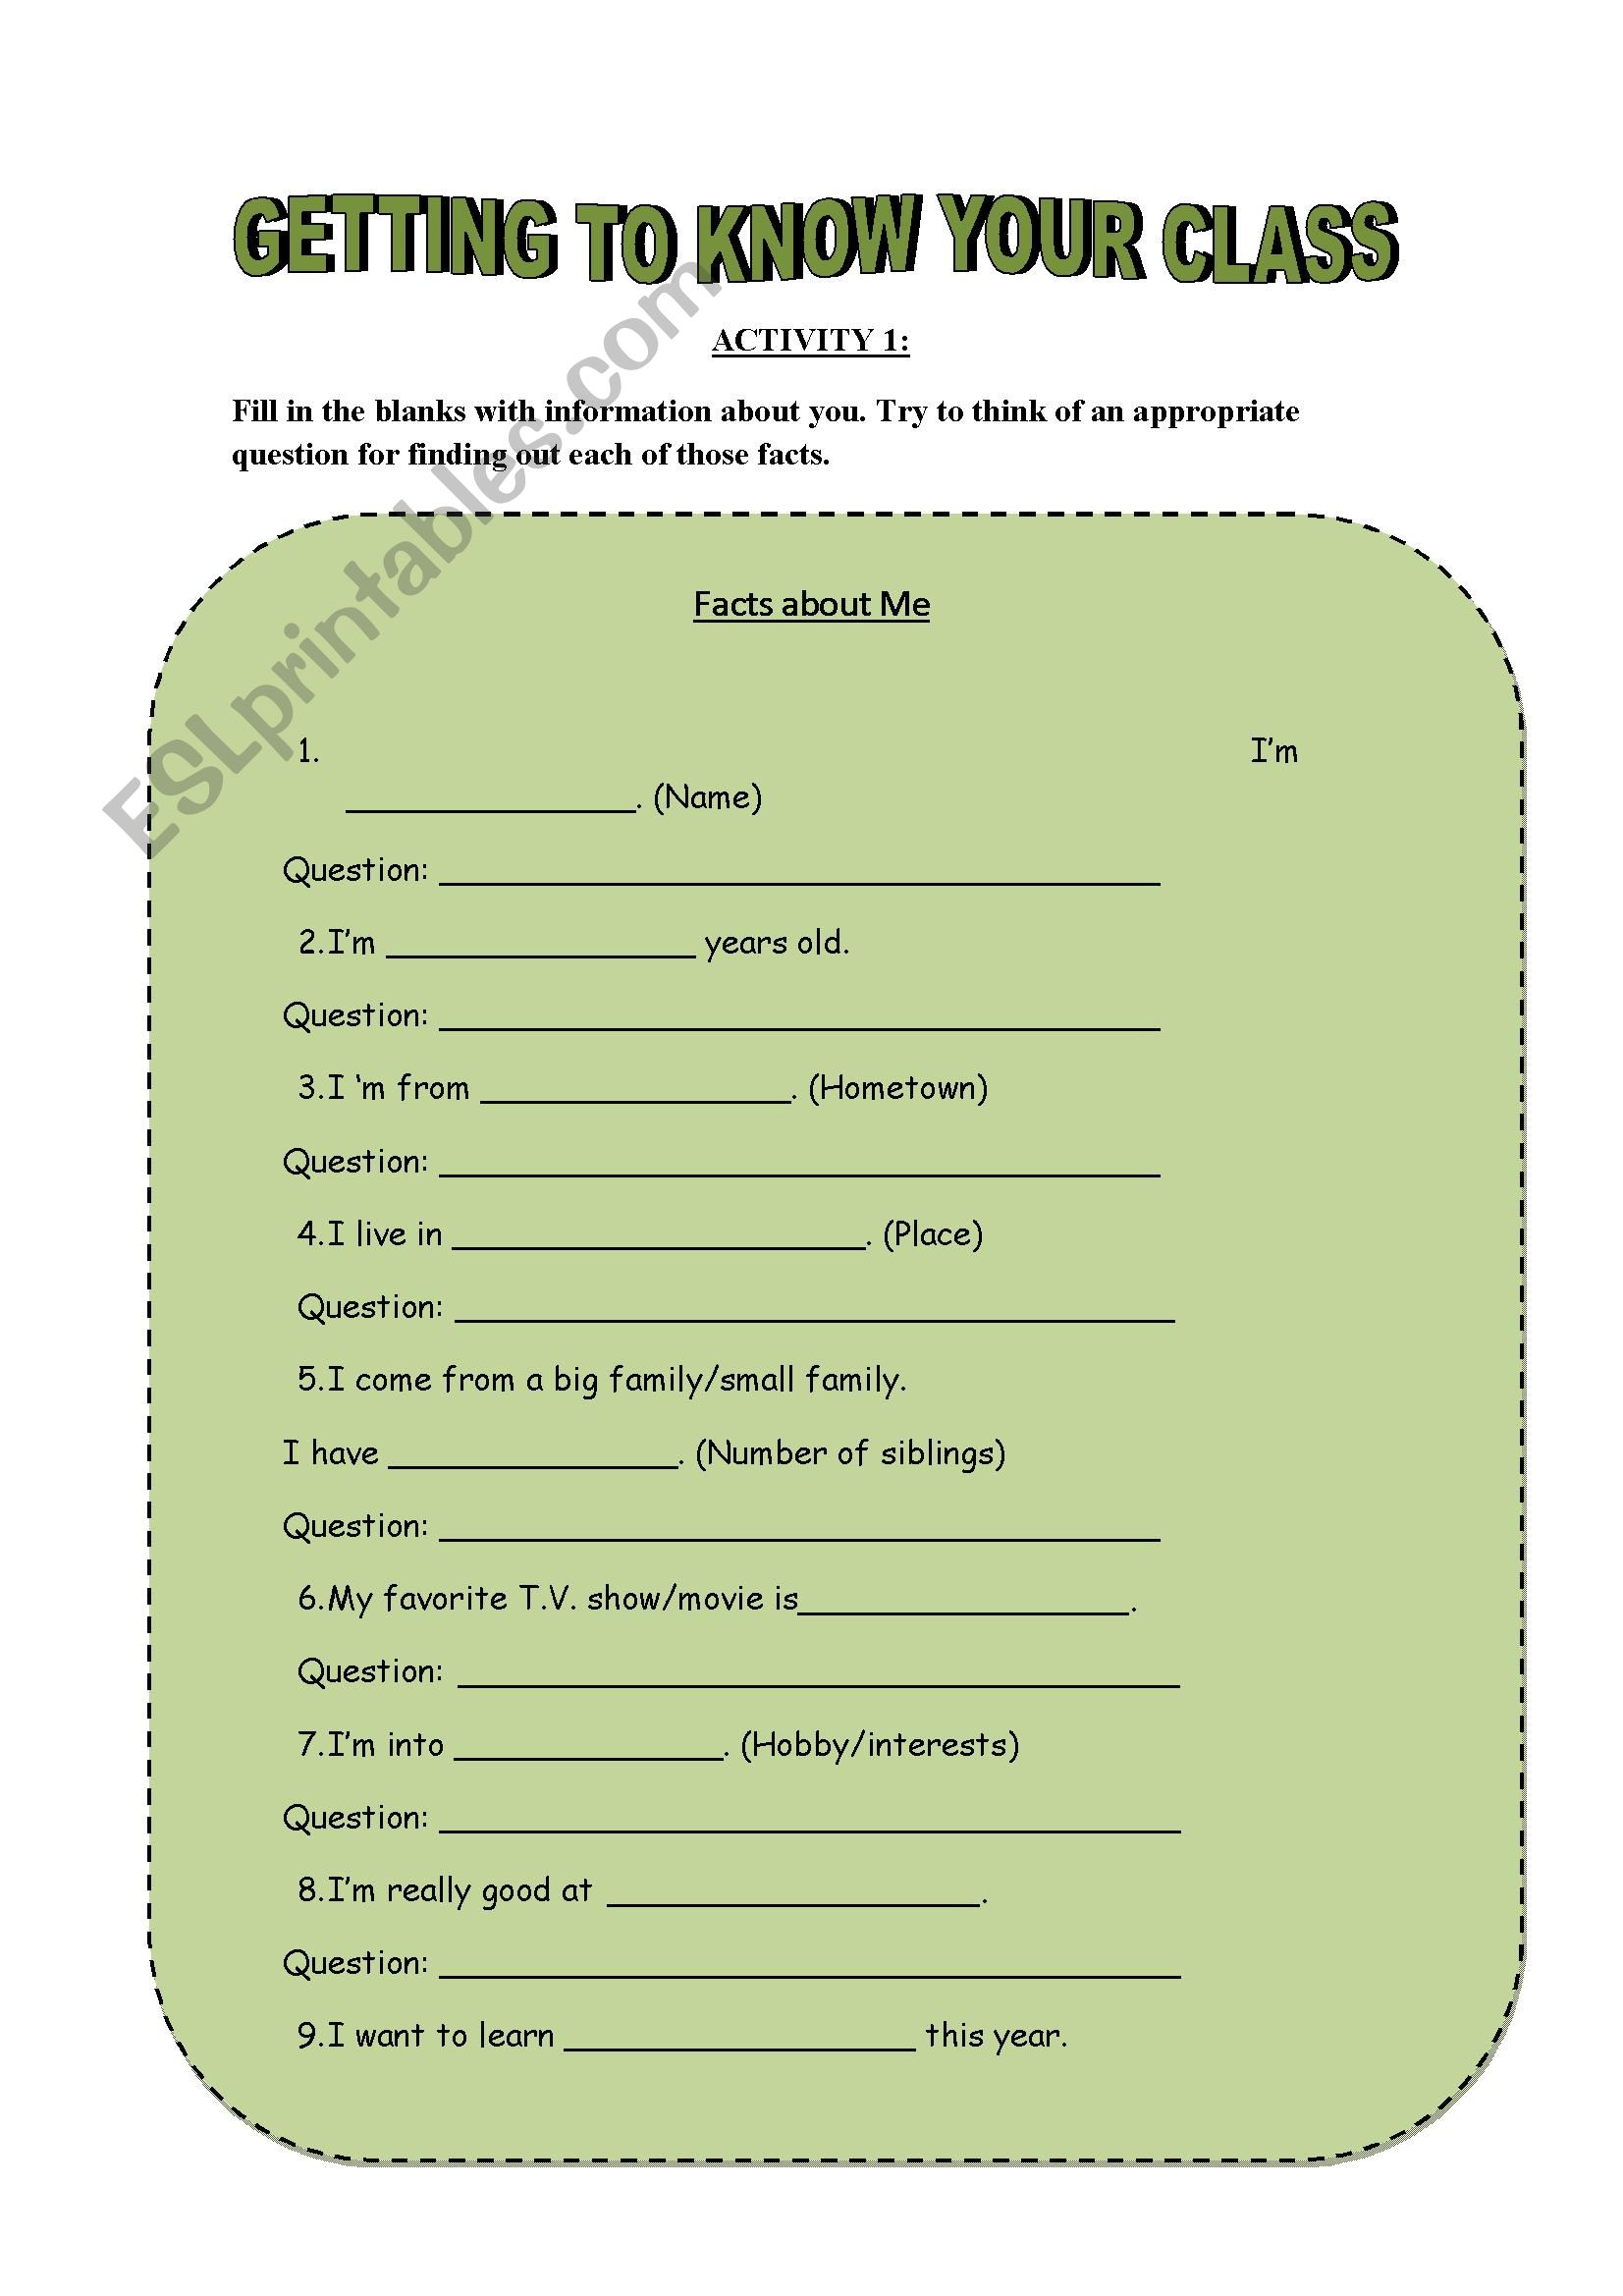 Getting to know toyr class worksheet